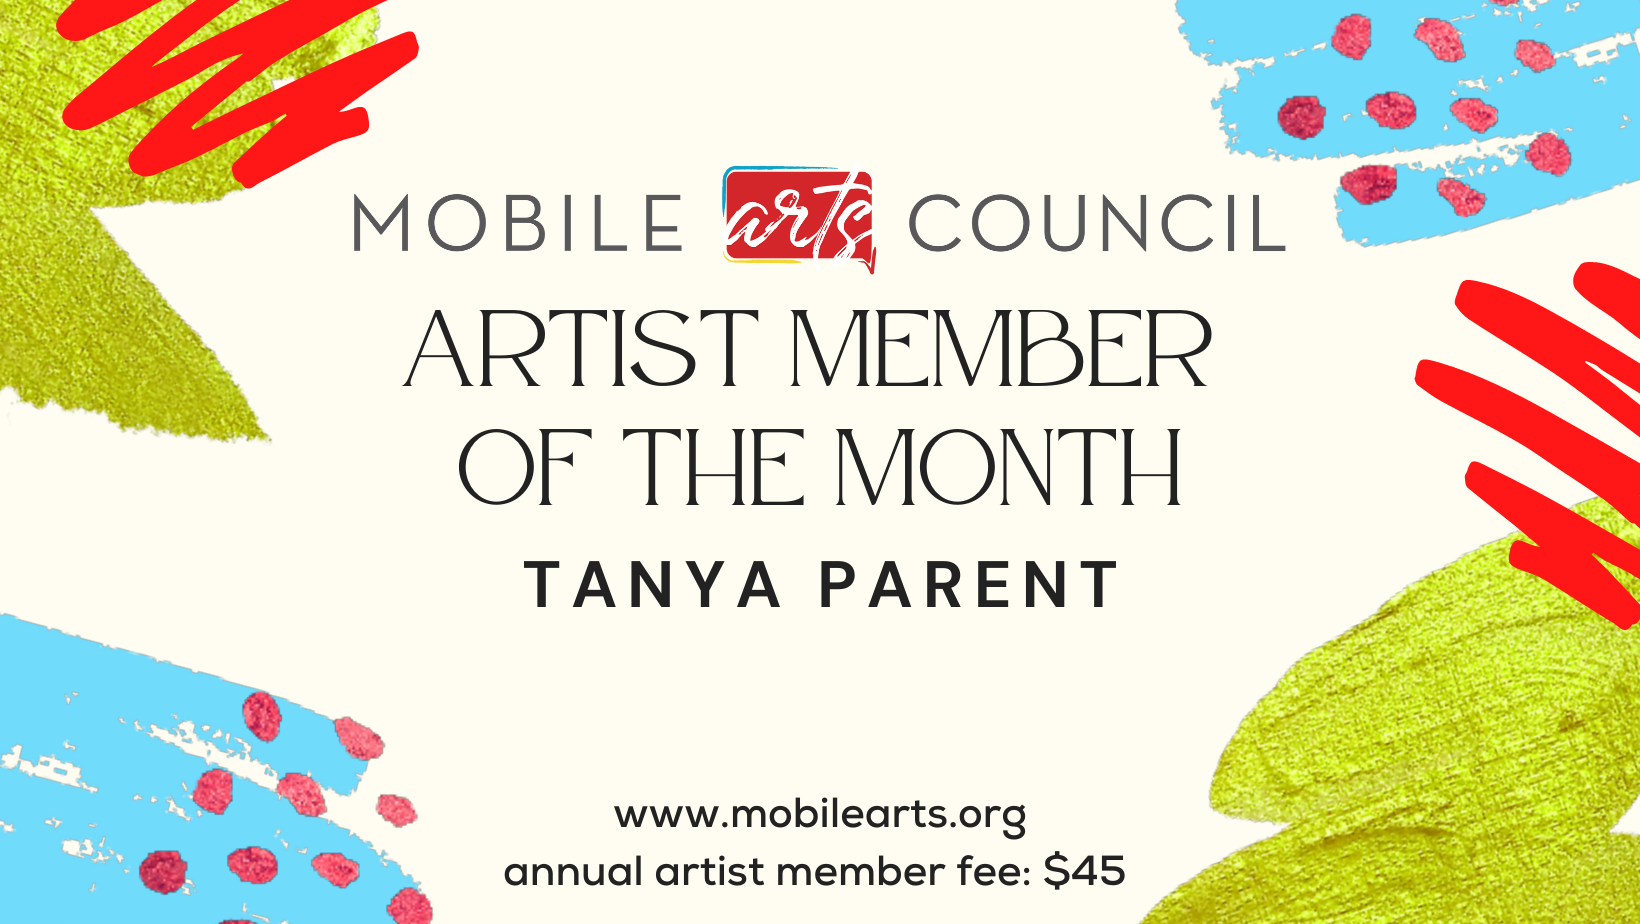 MOBILE arta COUNCIL ARTIST MEMBER OF THE MONTH TANYA PARENT www.mobilearts.org annual artist member fee: $45